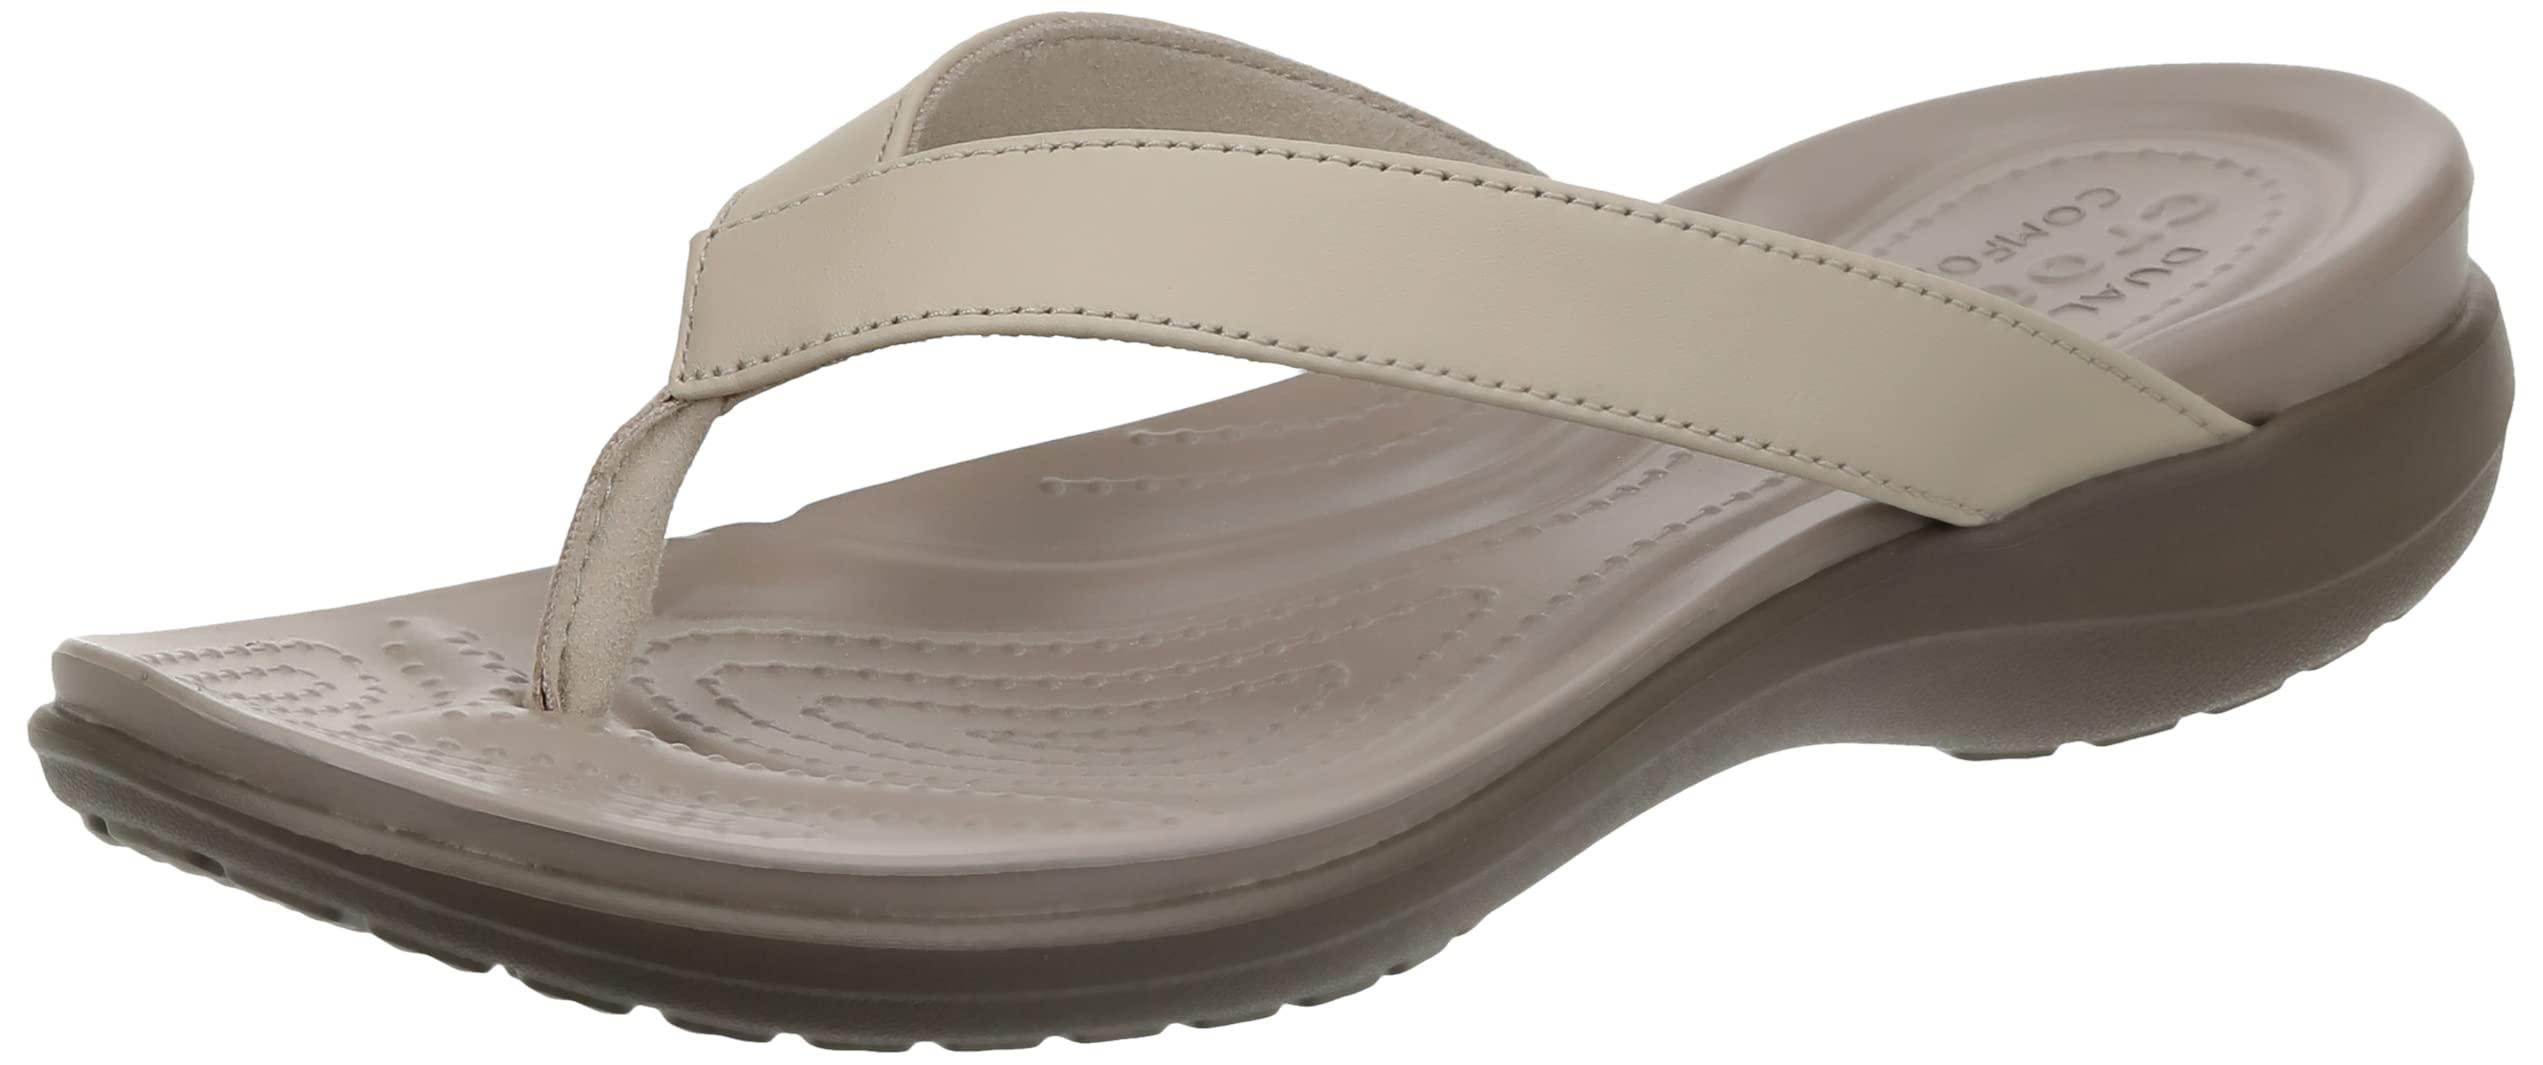 Crocs™ Capri V Flip Flop | Casual Sandal With Extra Soft Footbed And Soft  Leather Straps | Lightweight Beach Shoe | Lyst